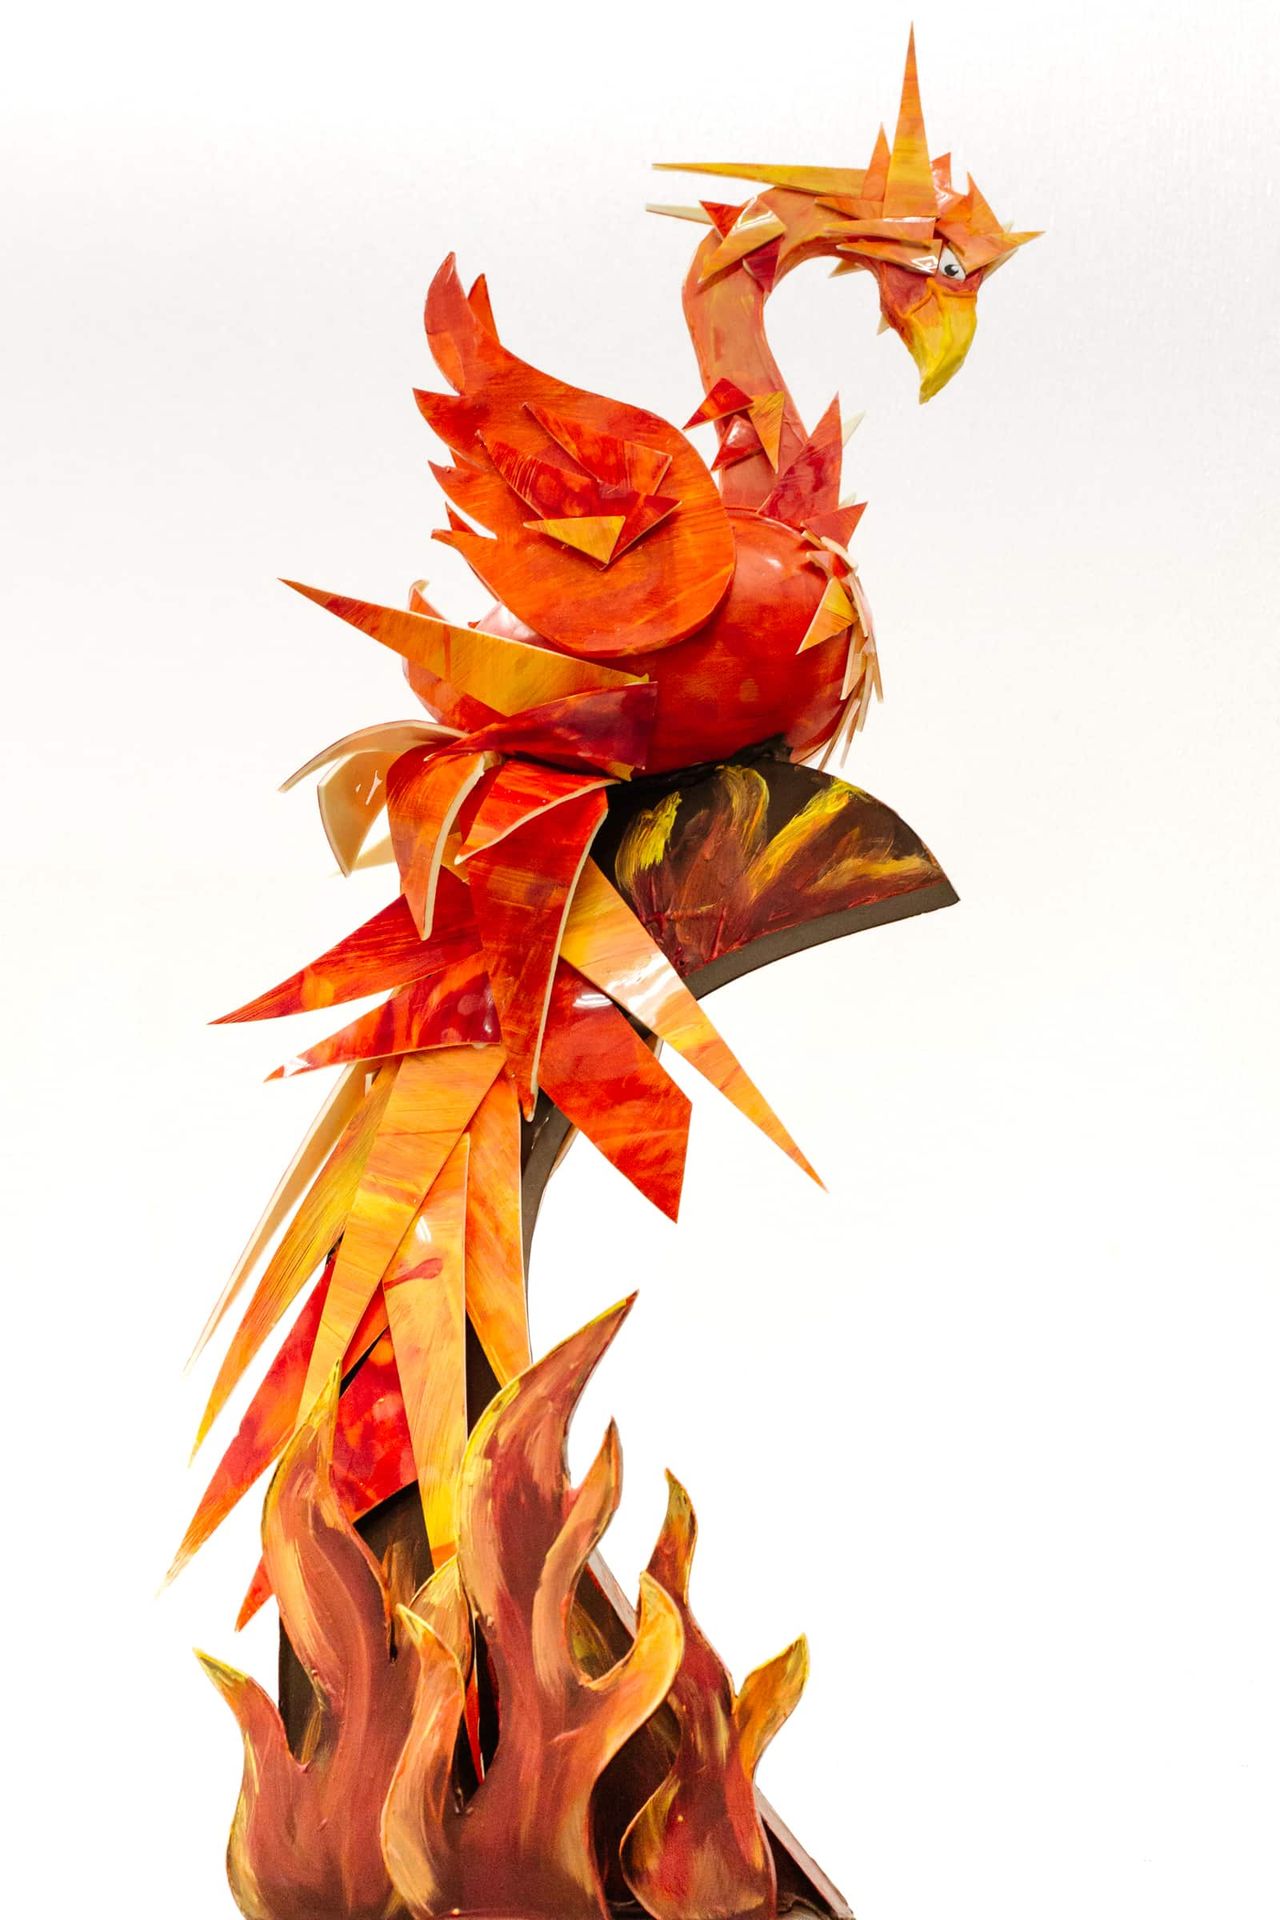 A large chocolate sculpture featuring a Phoenix sitting on top of abrtract red shared that look like flames. The feathers of the Phoenix mimick the same shape and colors of the flames.